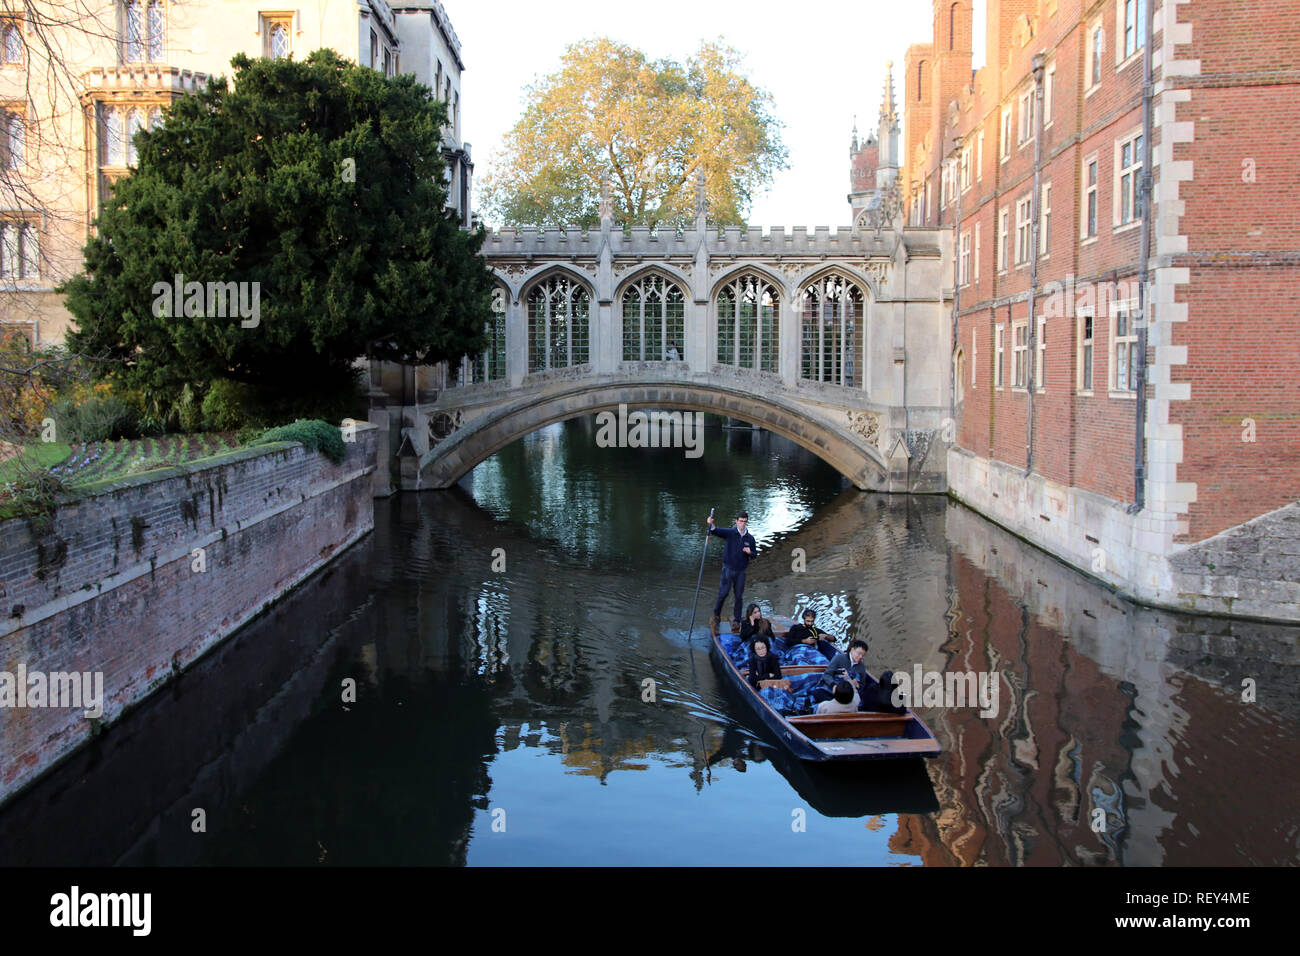 The Bridge of Sighs at St John's College in Cambridge, England Stock Photo